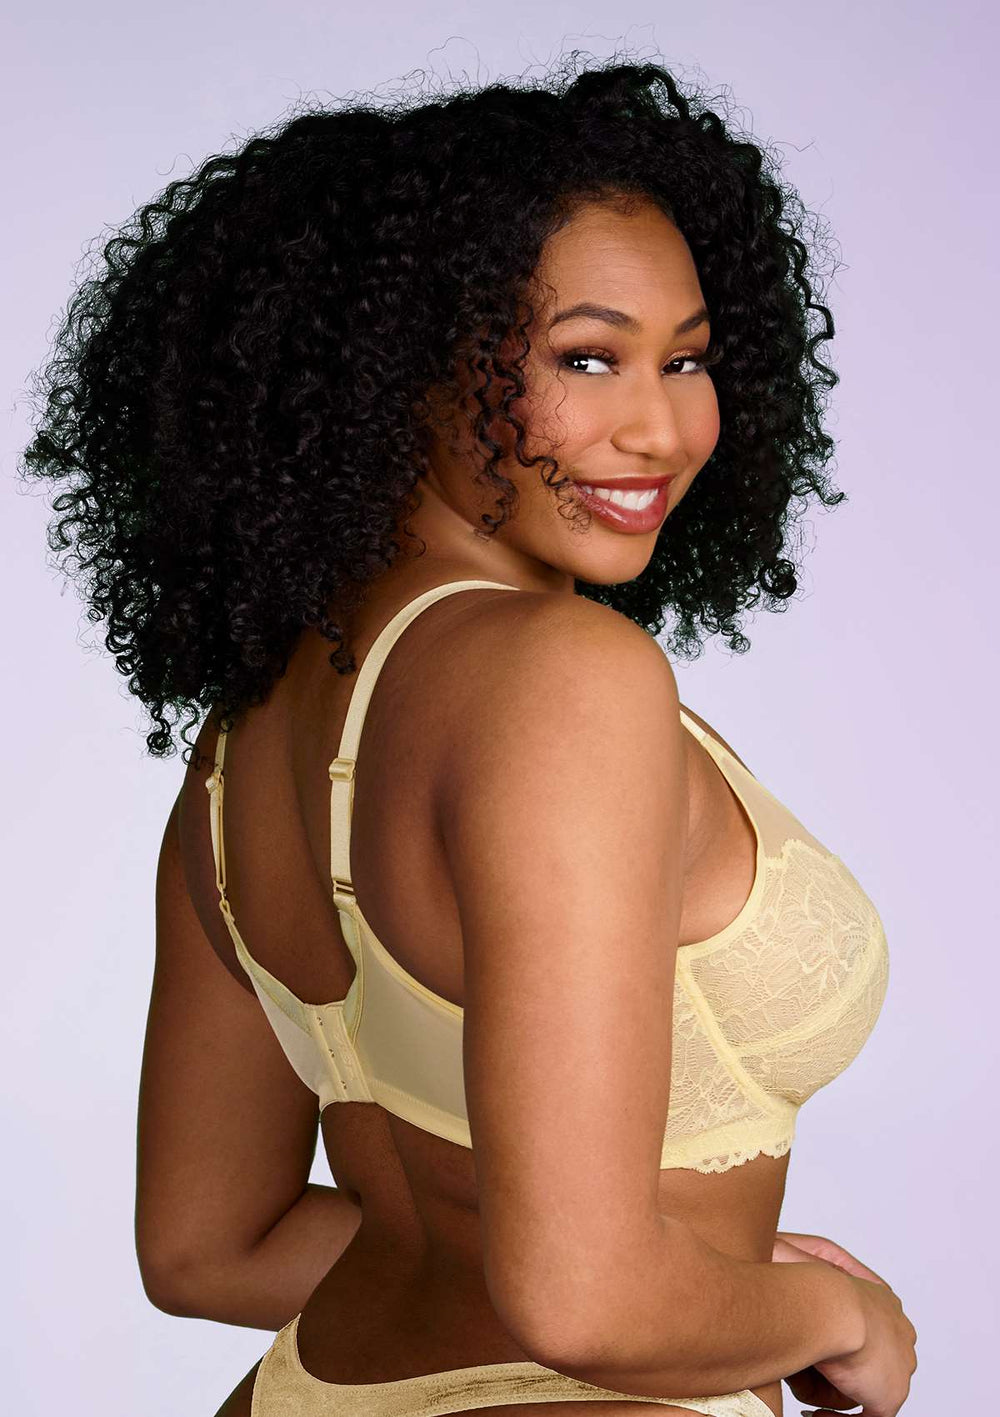 HSIA Unlined Lace Mesh Minimizer Bra for Large Breasts, Full Coverage